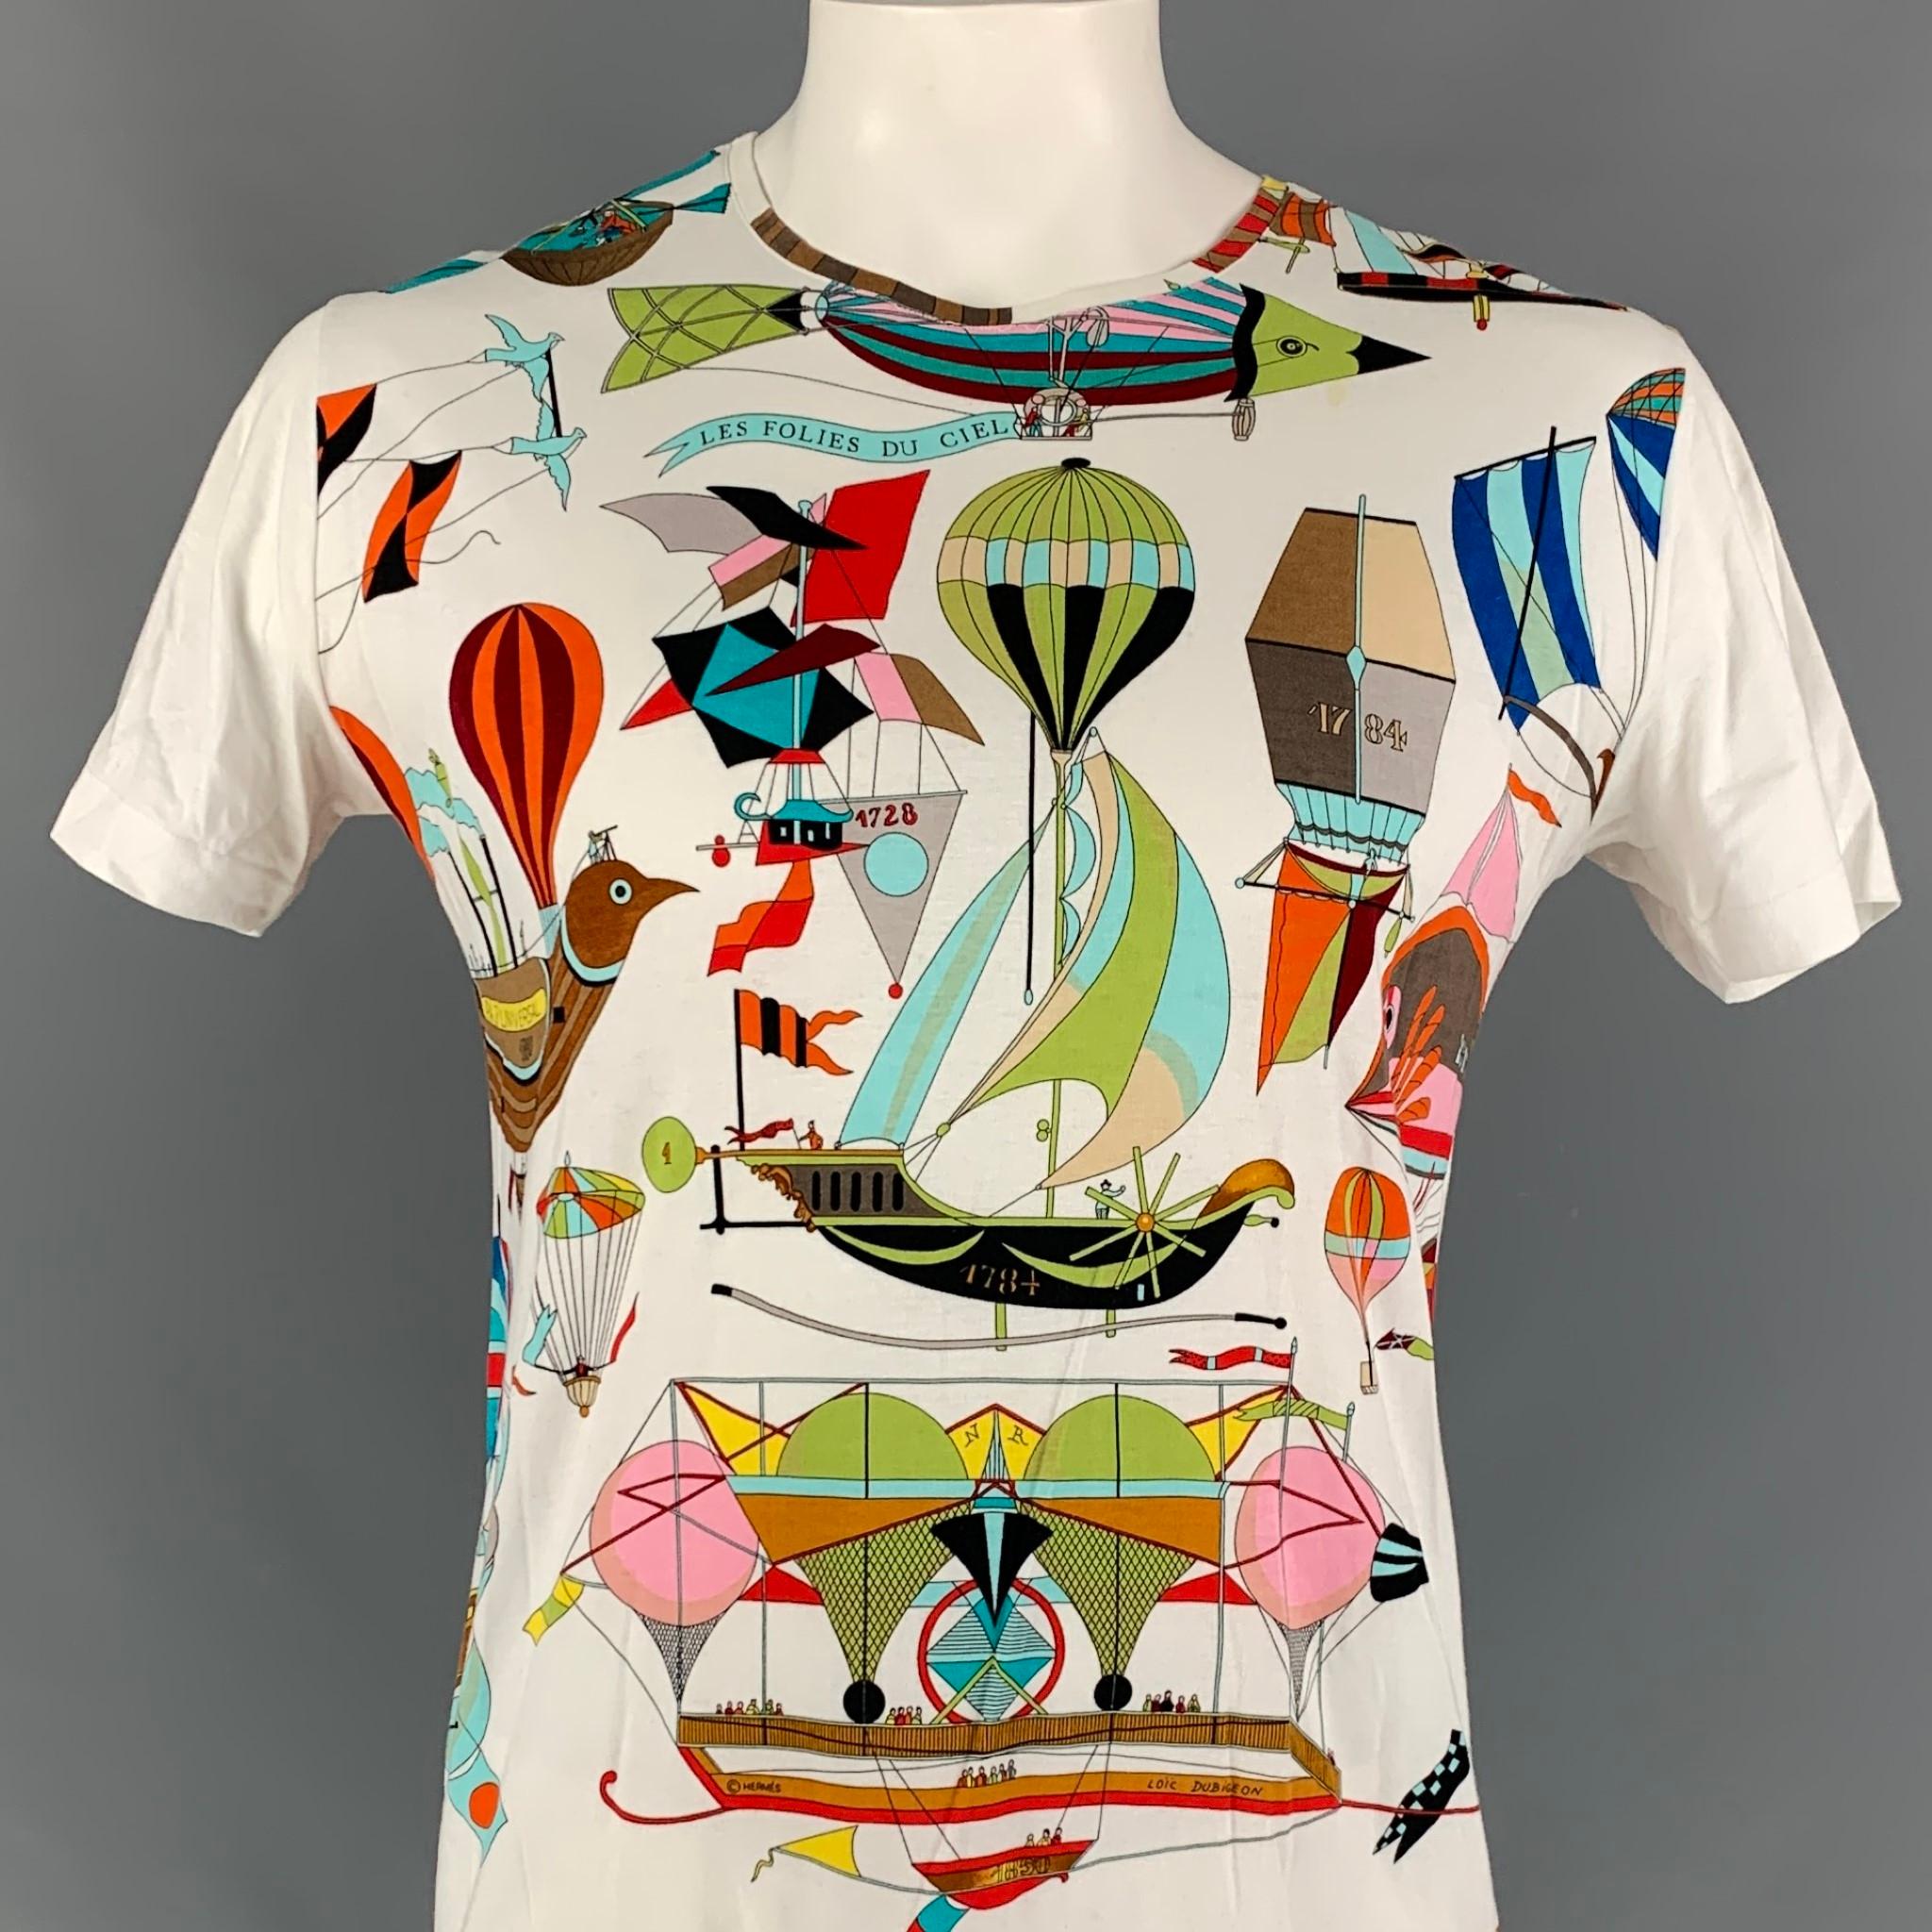 HERMES 'Les Folies du Ciel' by Loic Dubigeon t-shirt comes in a multi-color print cotton featuring short sleeves and a crew-neck. Made in Italy. 

Good Pre-Owned Condition. Light mark at front.
Marked: XL

Measurements:

Shoulder: 19.5 in.
Chest: 40